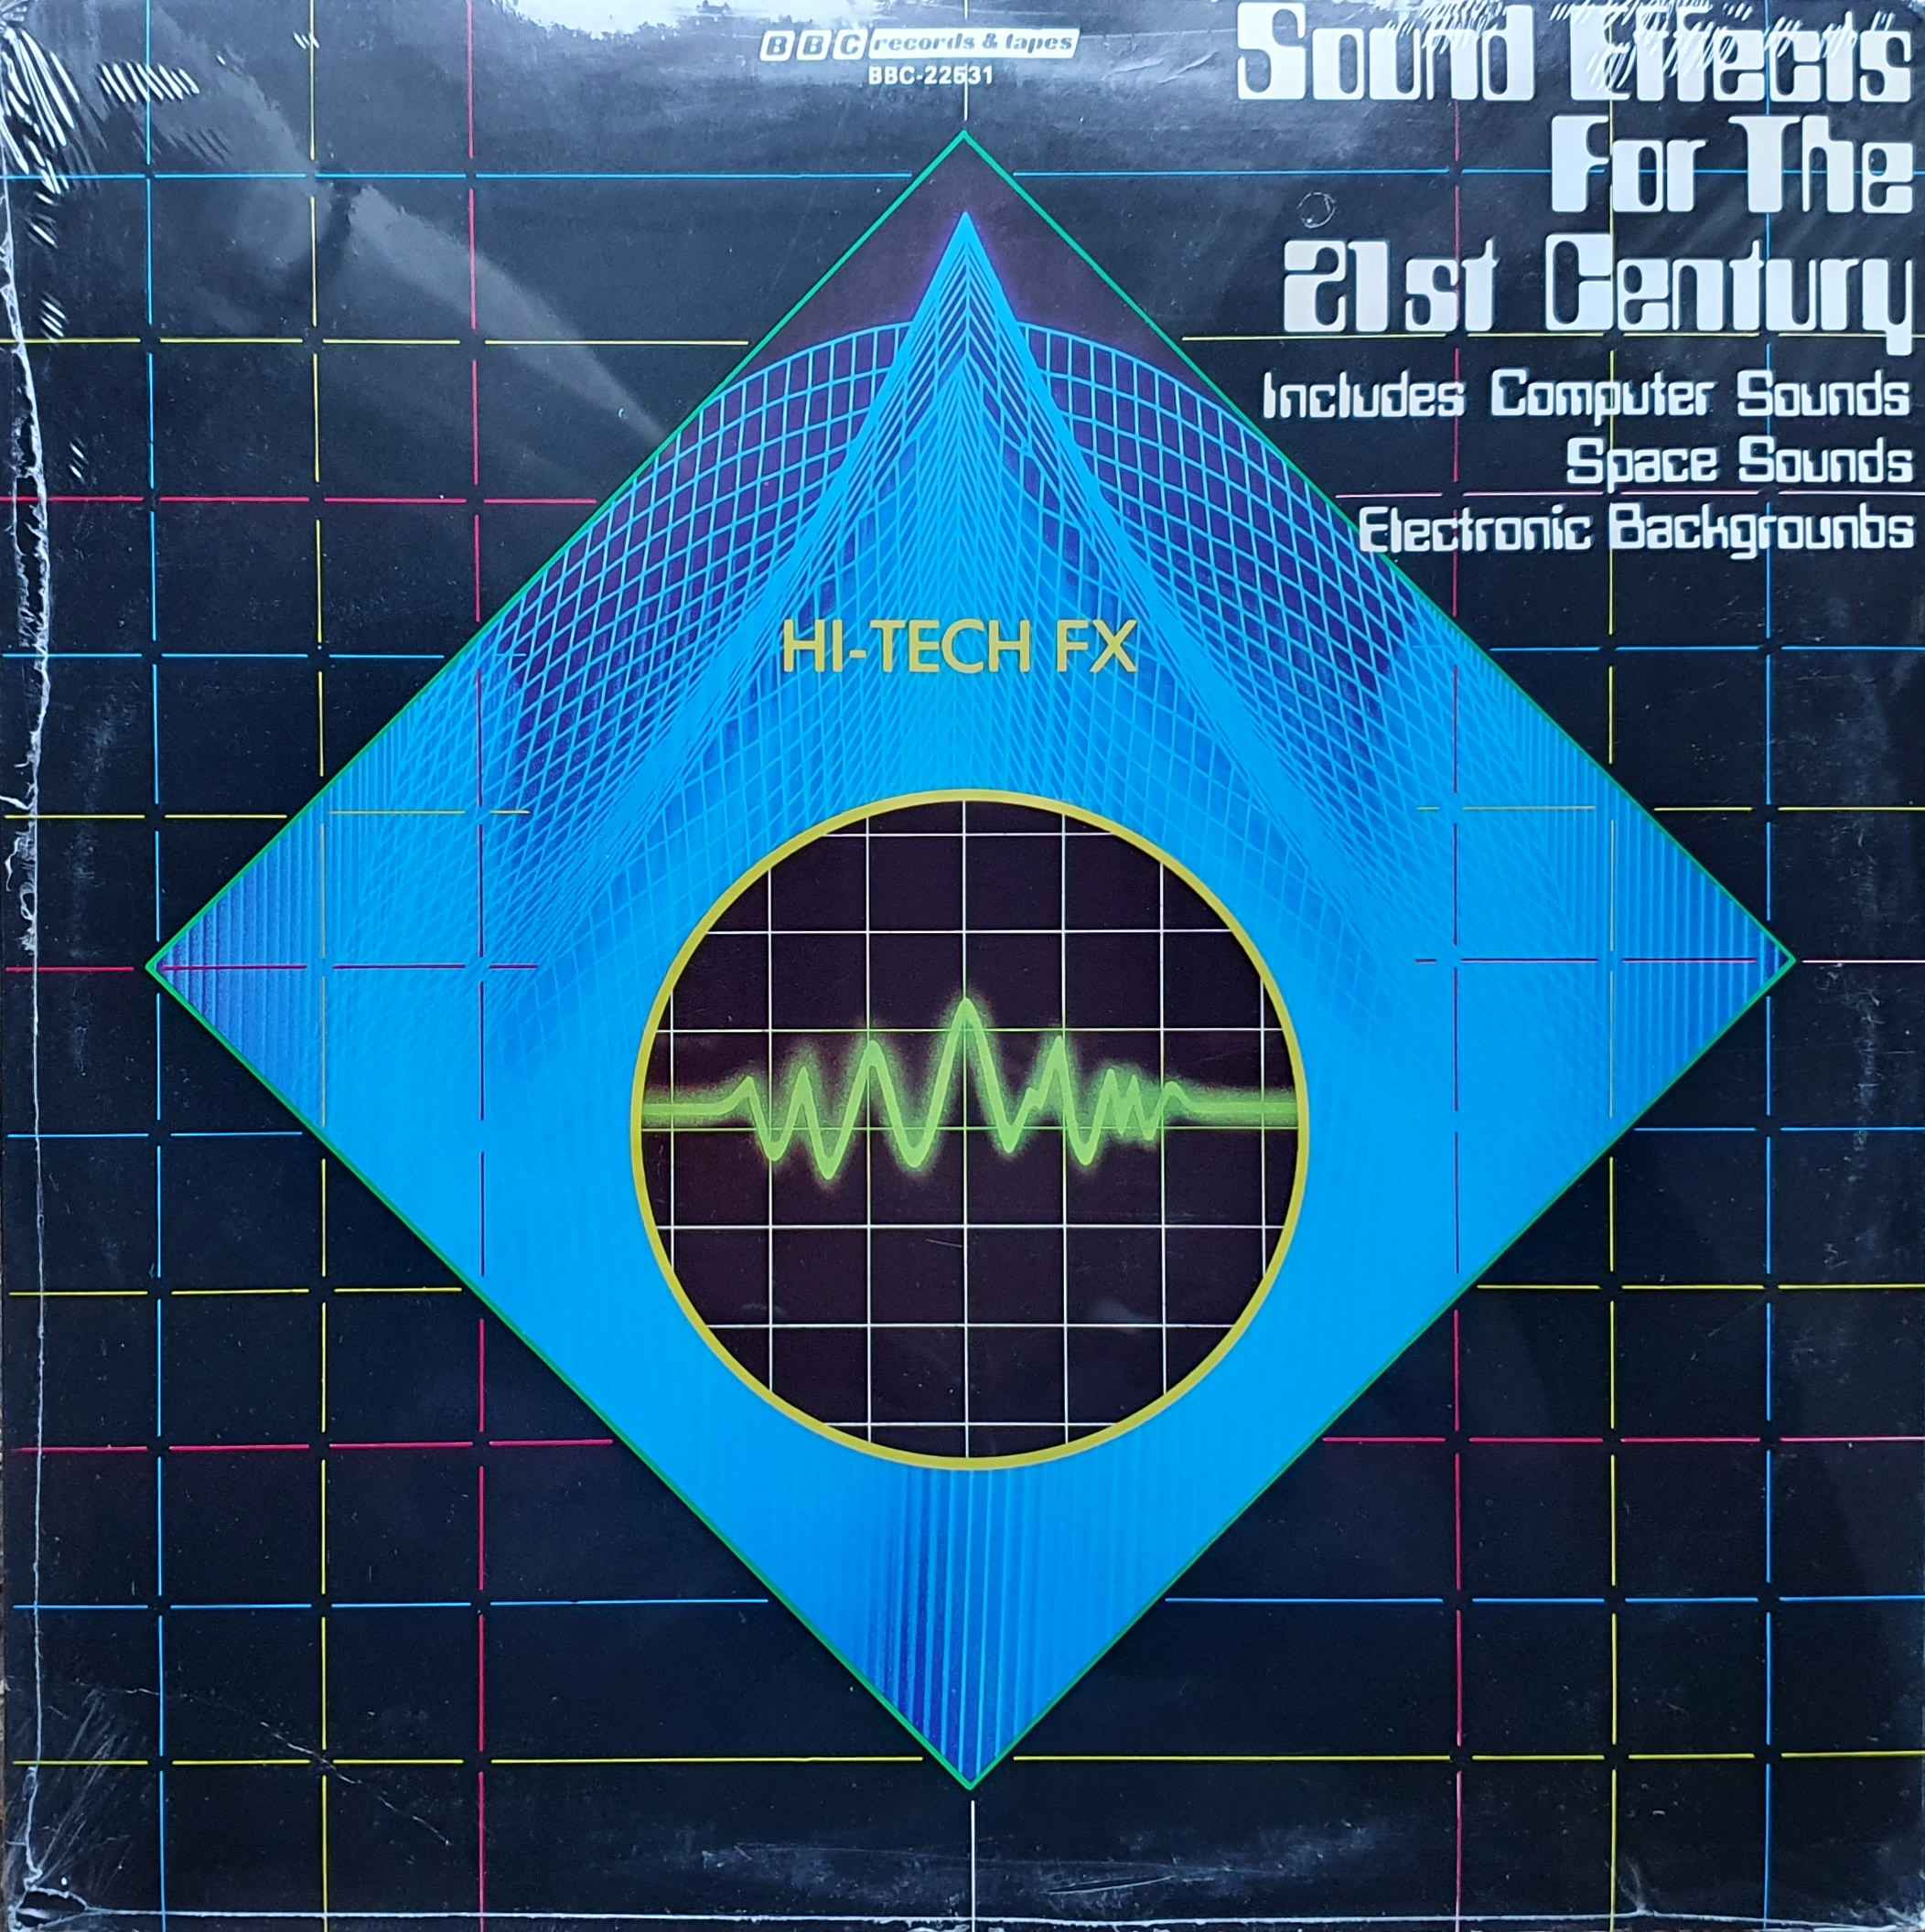 Picture of BBC - 22531 Hi-Tech FX (US import) by artist Various from the BBC albums - Records and Tapes library